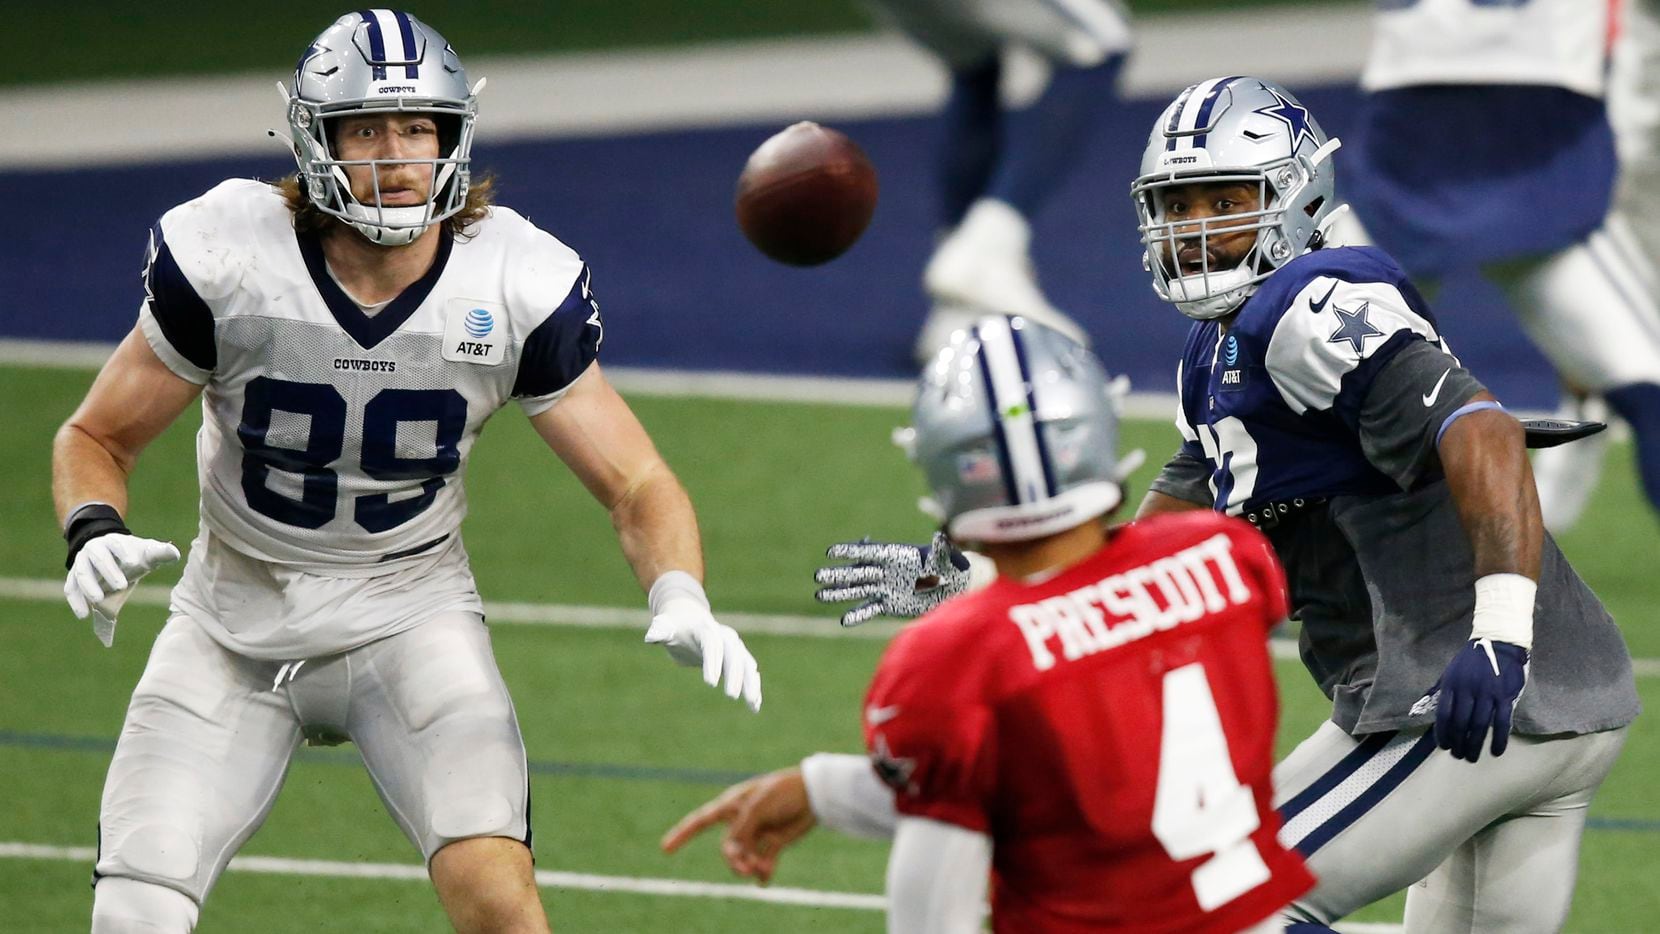 Dallas Cowboys tight end Blake Jarwin (89) watches as quarterback Dak Prescott (4) passes the ball during training camp at The Star in Frisco, Texas on Monday, August 24, 2020.